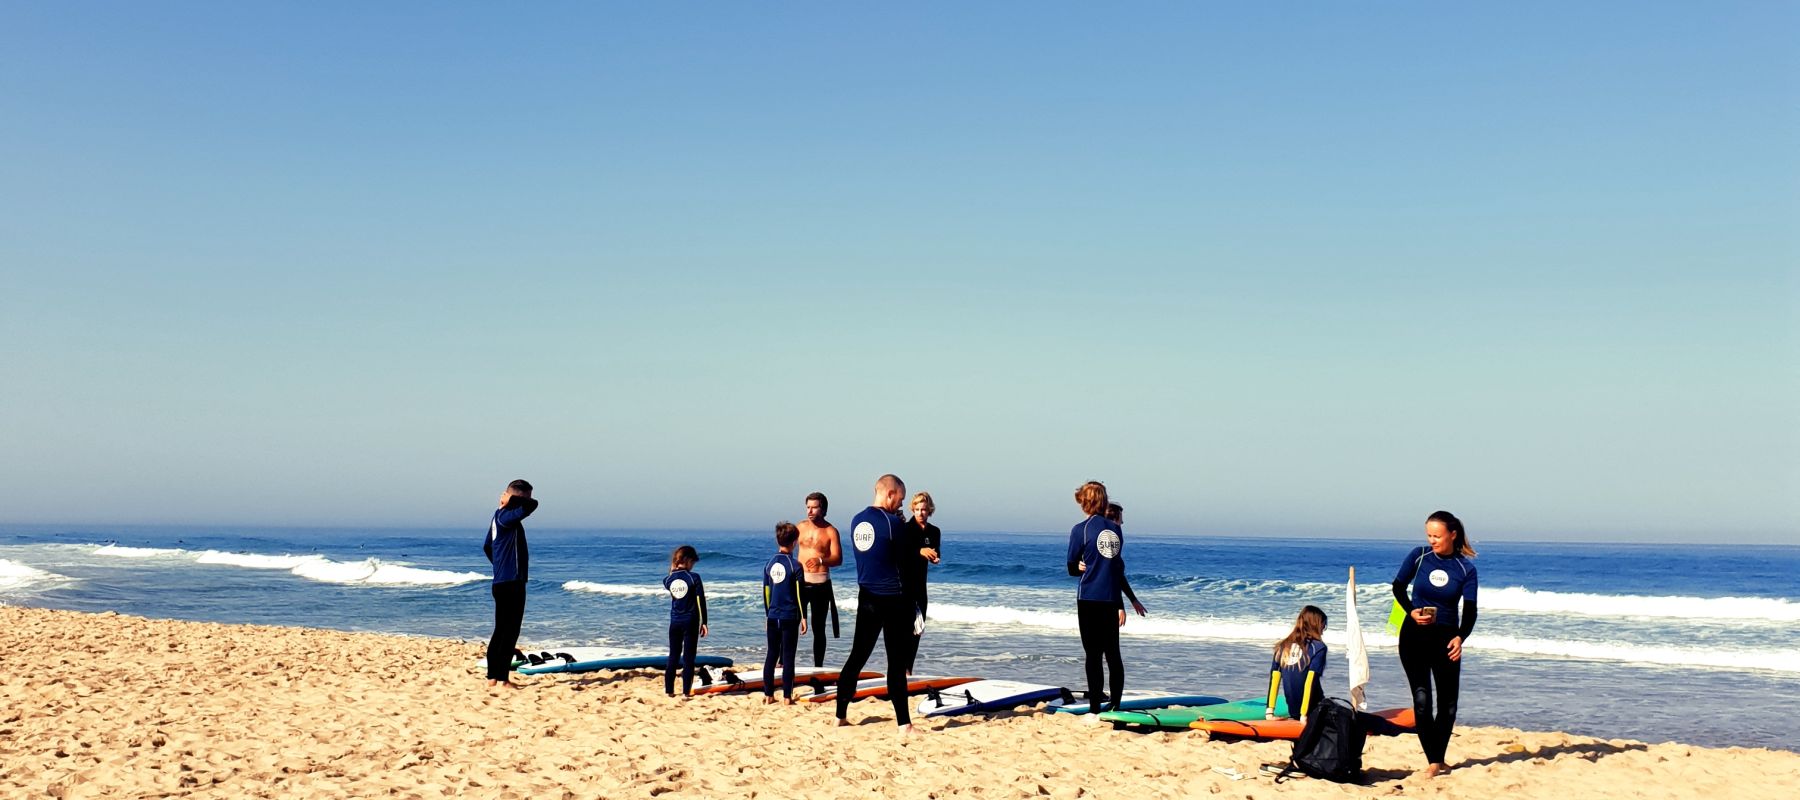 A joyful family group participating in surf lessons at Praia da Areia Branca, Far End Surf House. The beach setting, with waves in the background, captures the excitement and camaraderie of a memorable surfing experience for all ages.